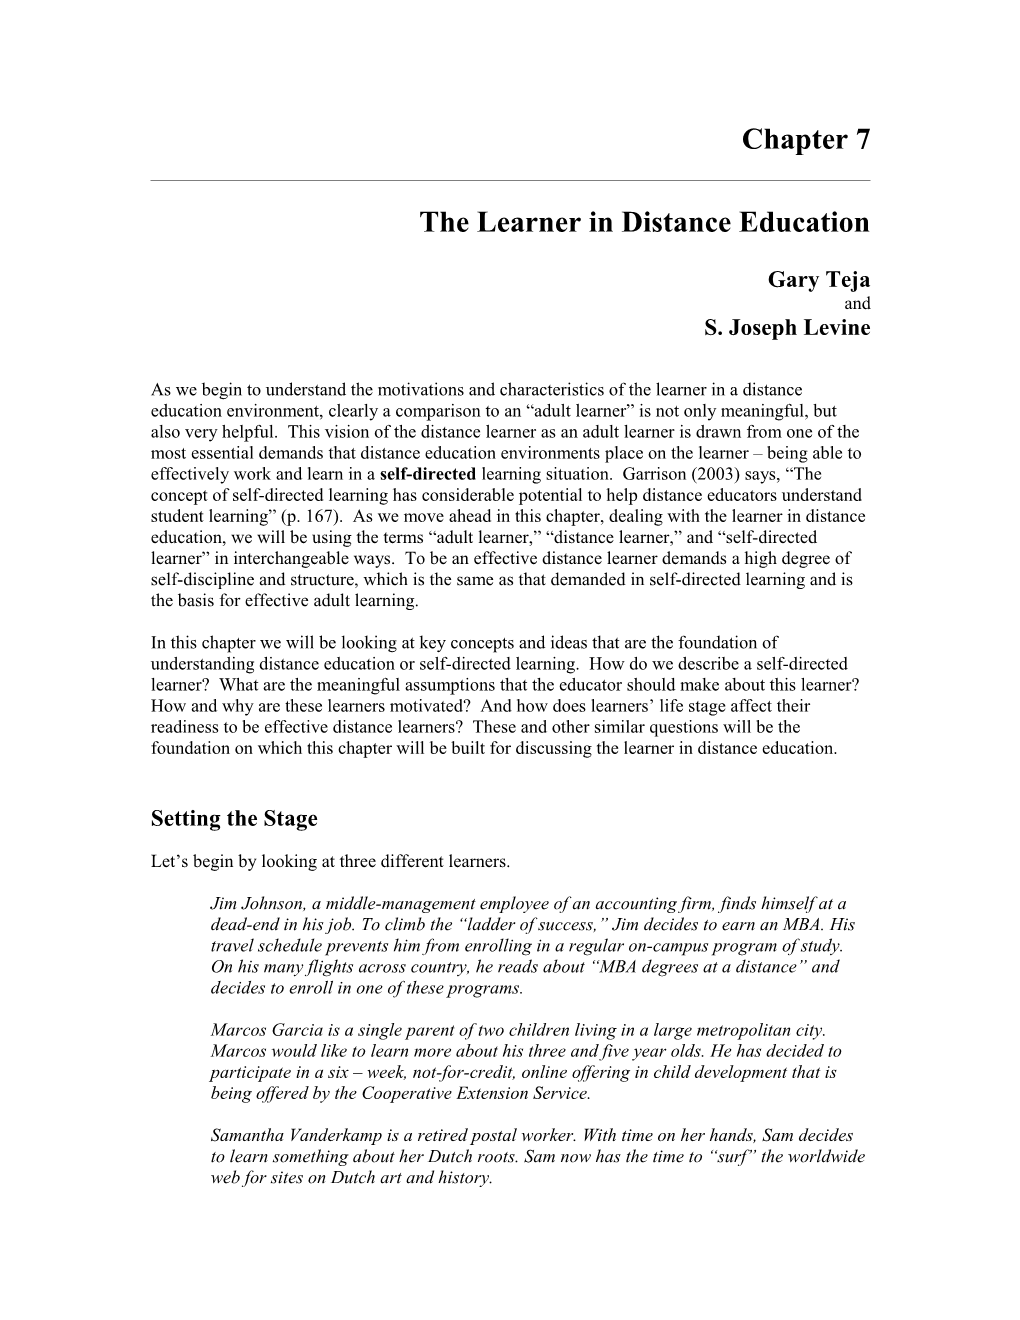 The Learner in Distance Education